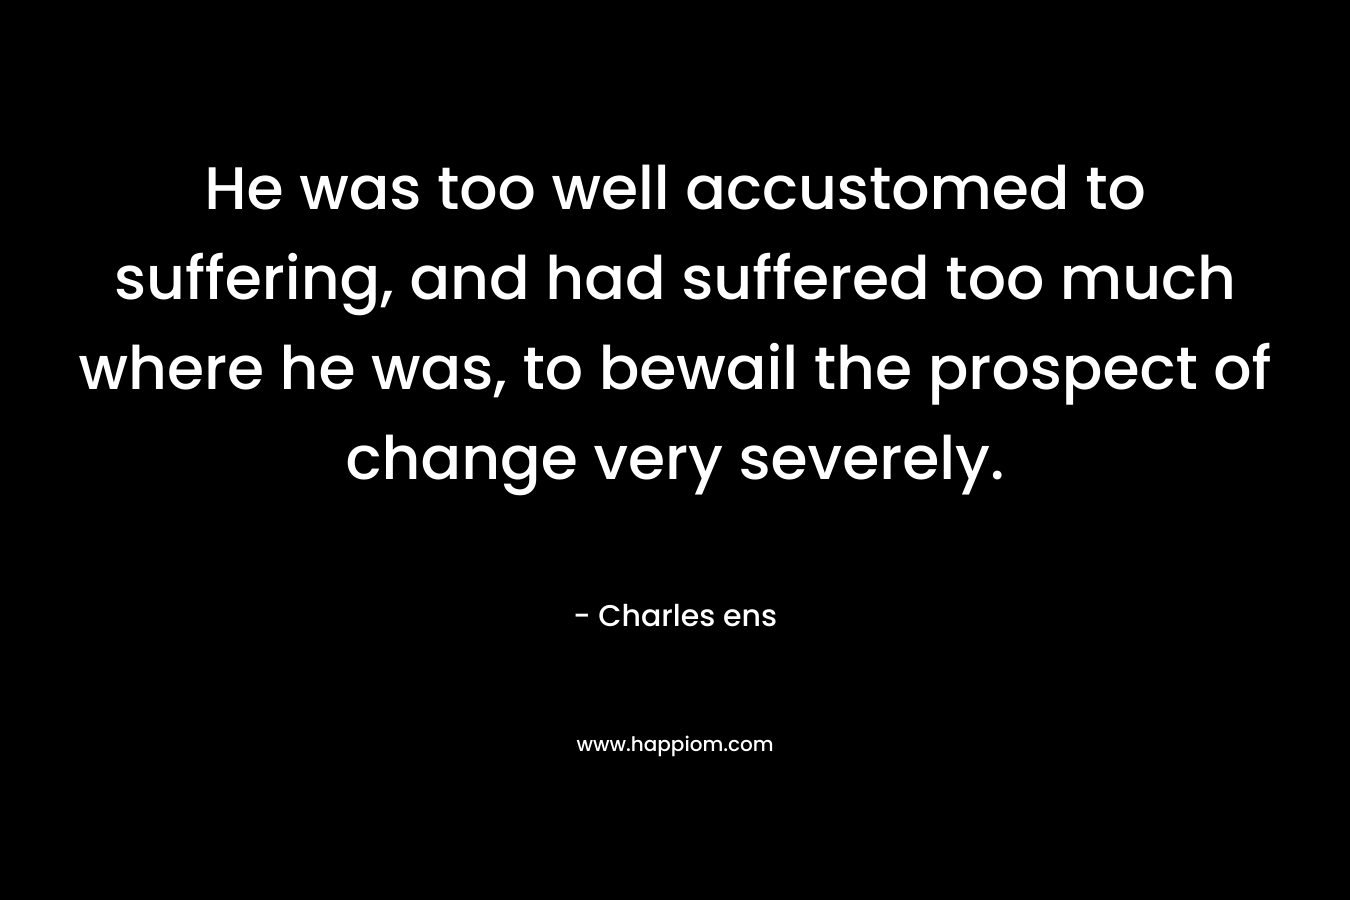 He was too well accustomed to suffering, and had suffered too much where he was, to bewail the prospect of change very severely. – Charles ens